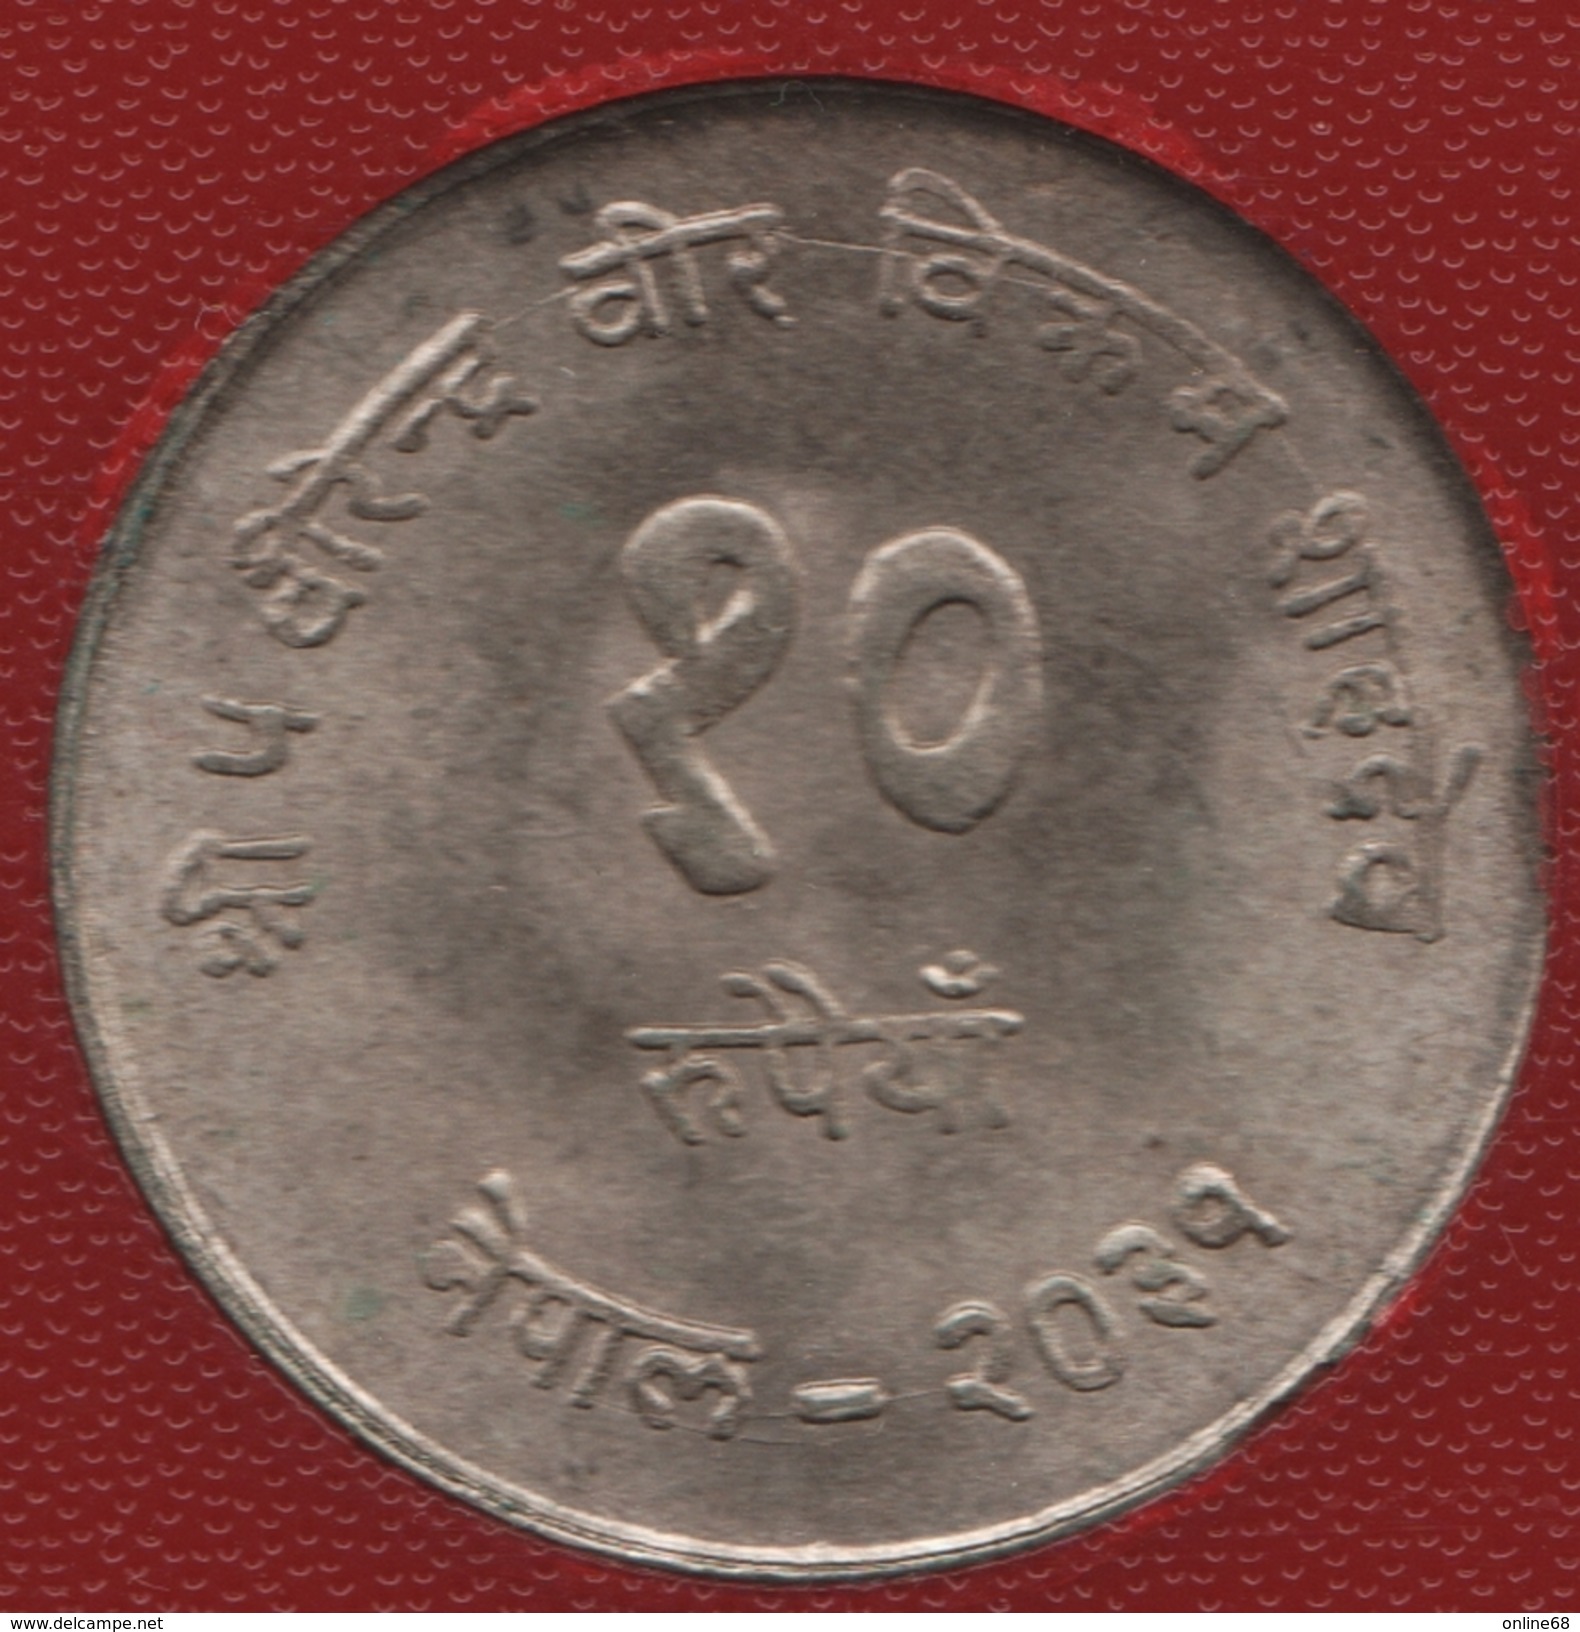 NEPAL 10 RUPEE 2031 (1974) FAO - Planned Family  ARGENT SILVER  KM# 835 - Népal